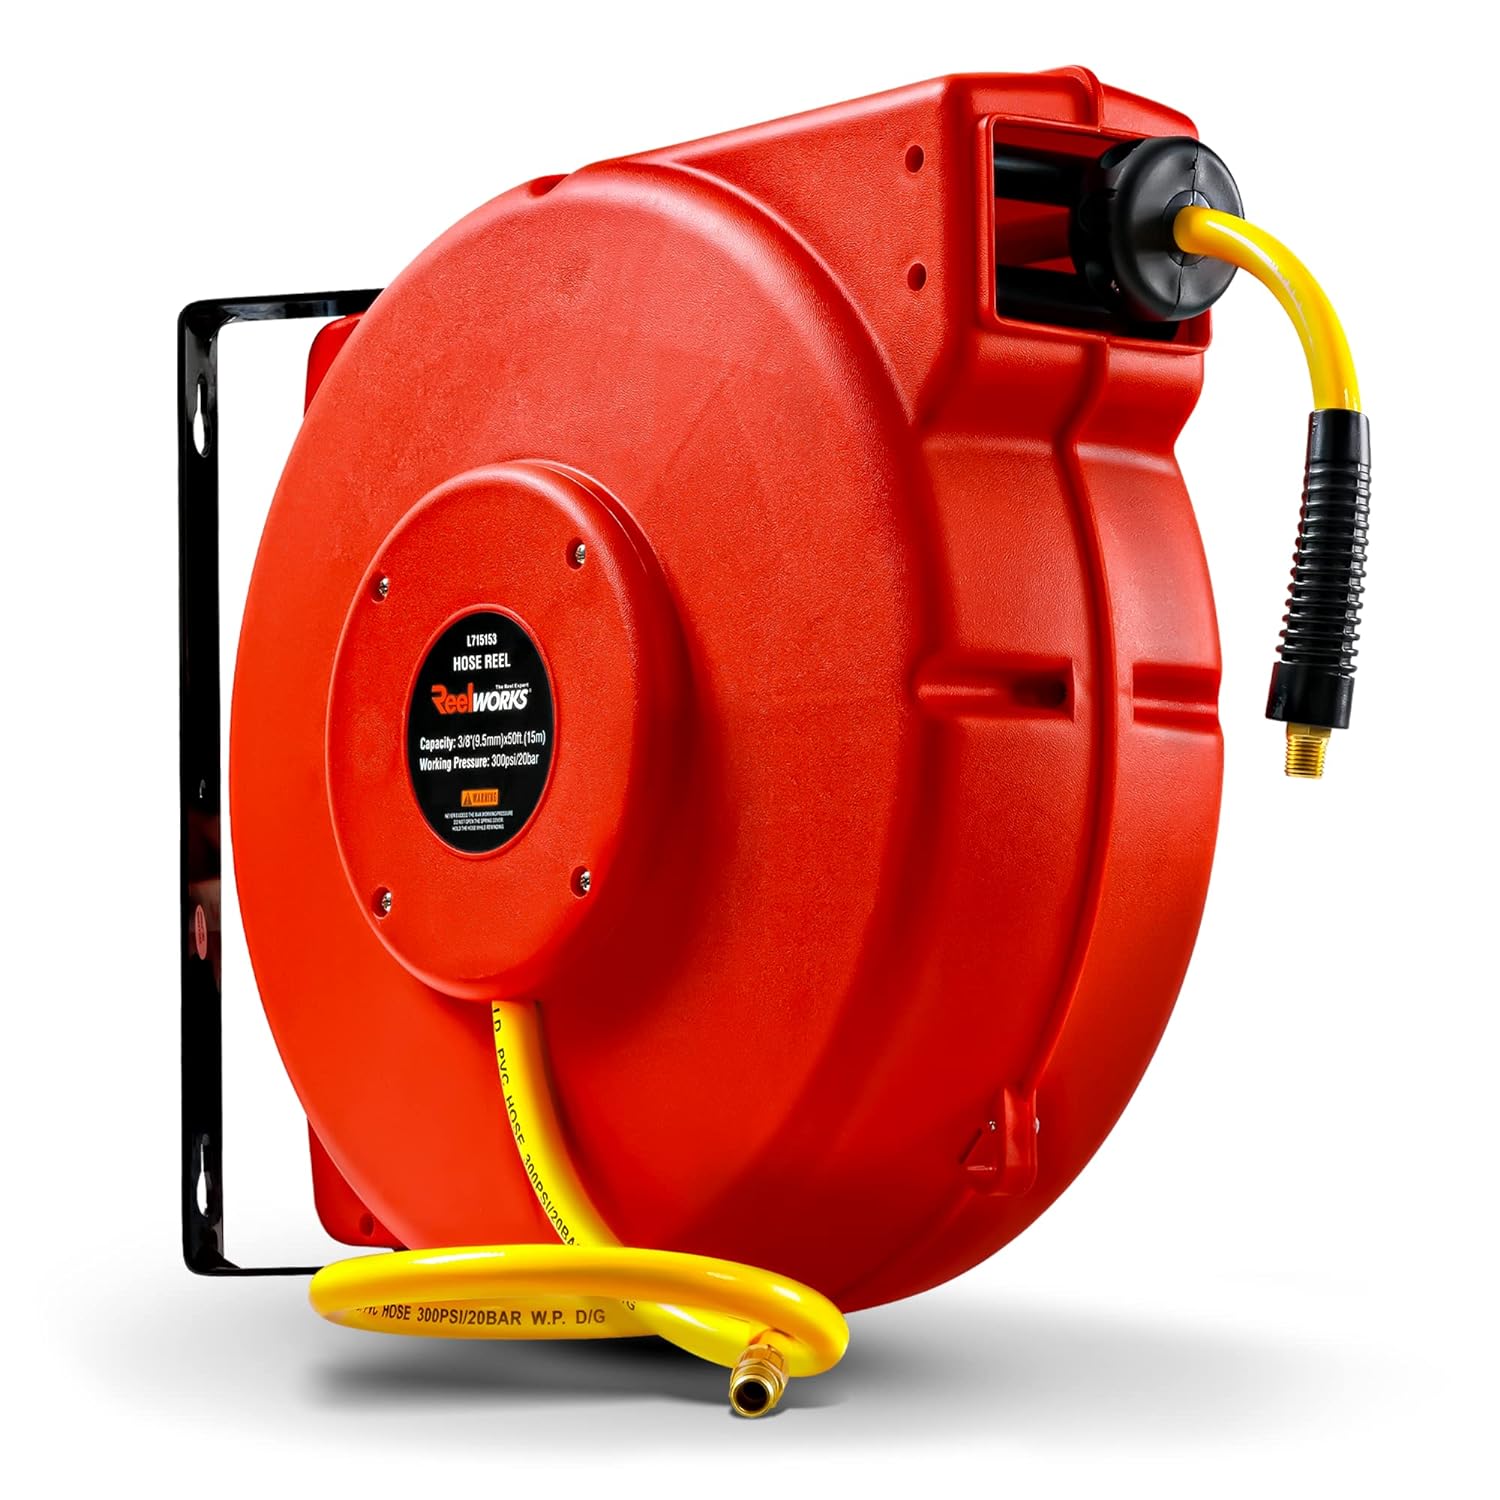 ReelWorks Air Hose Reel - Retractable 3/8 x 50' with 3' Lead-In Hose &  1/4 NPT Connections - Mountable